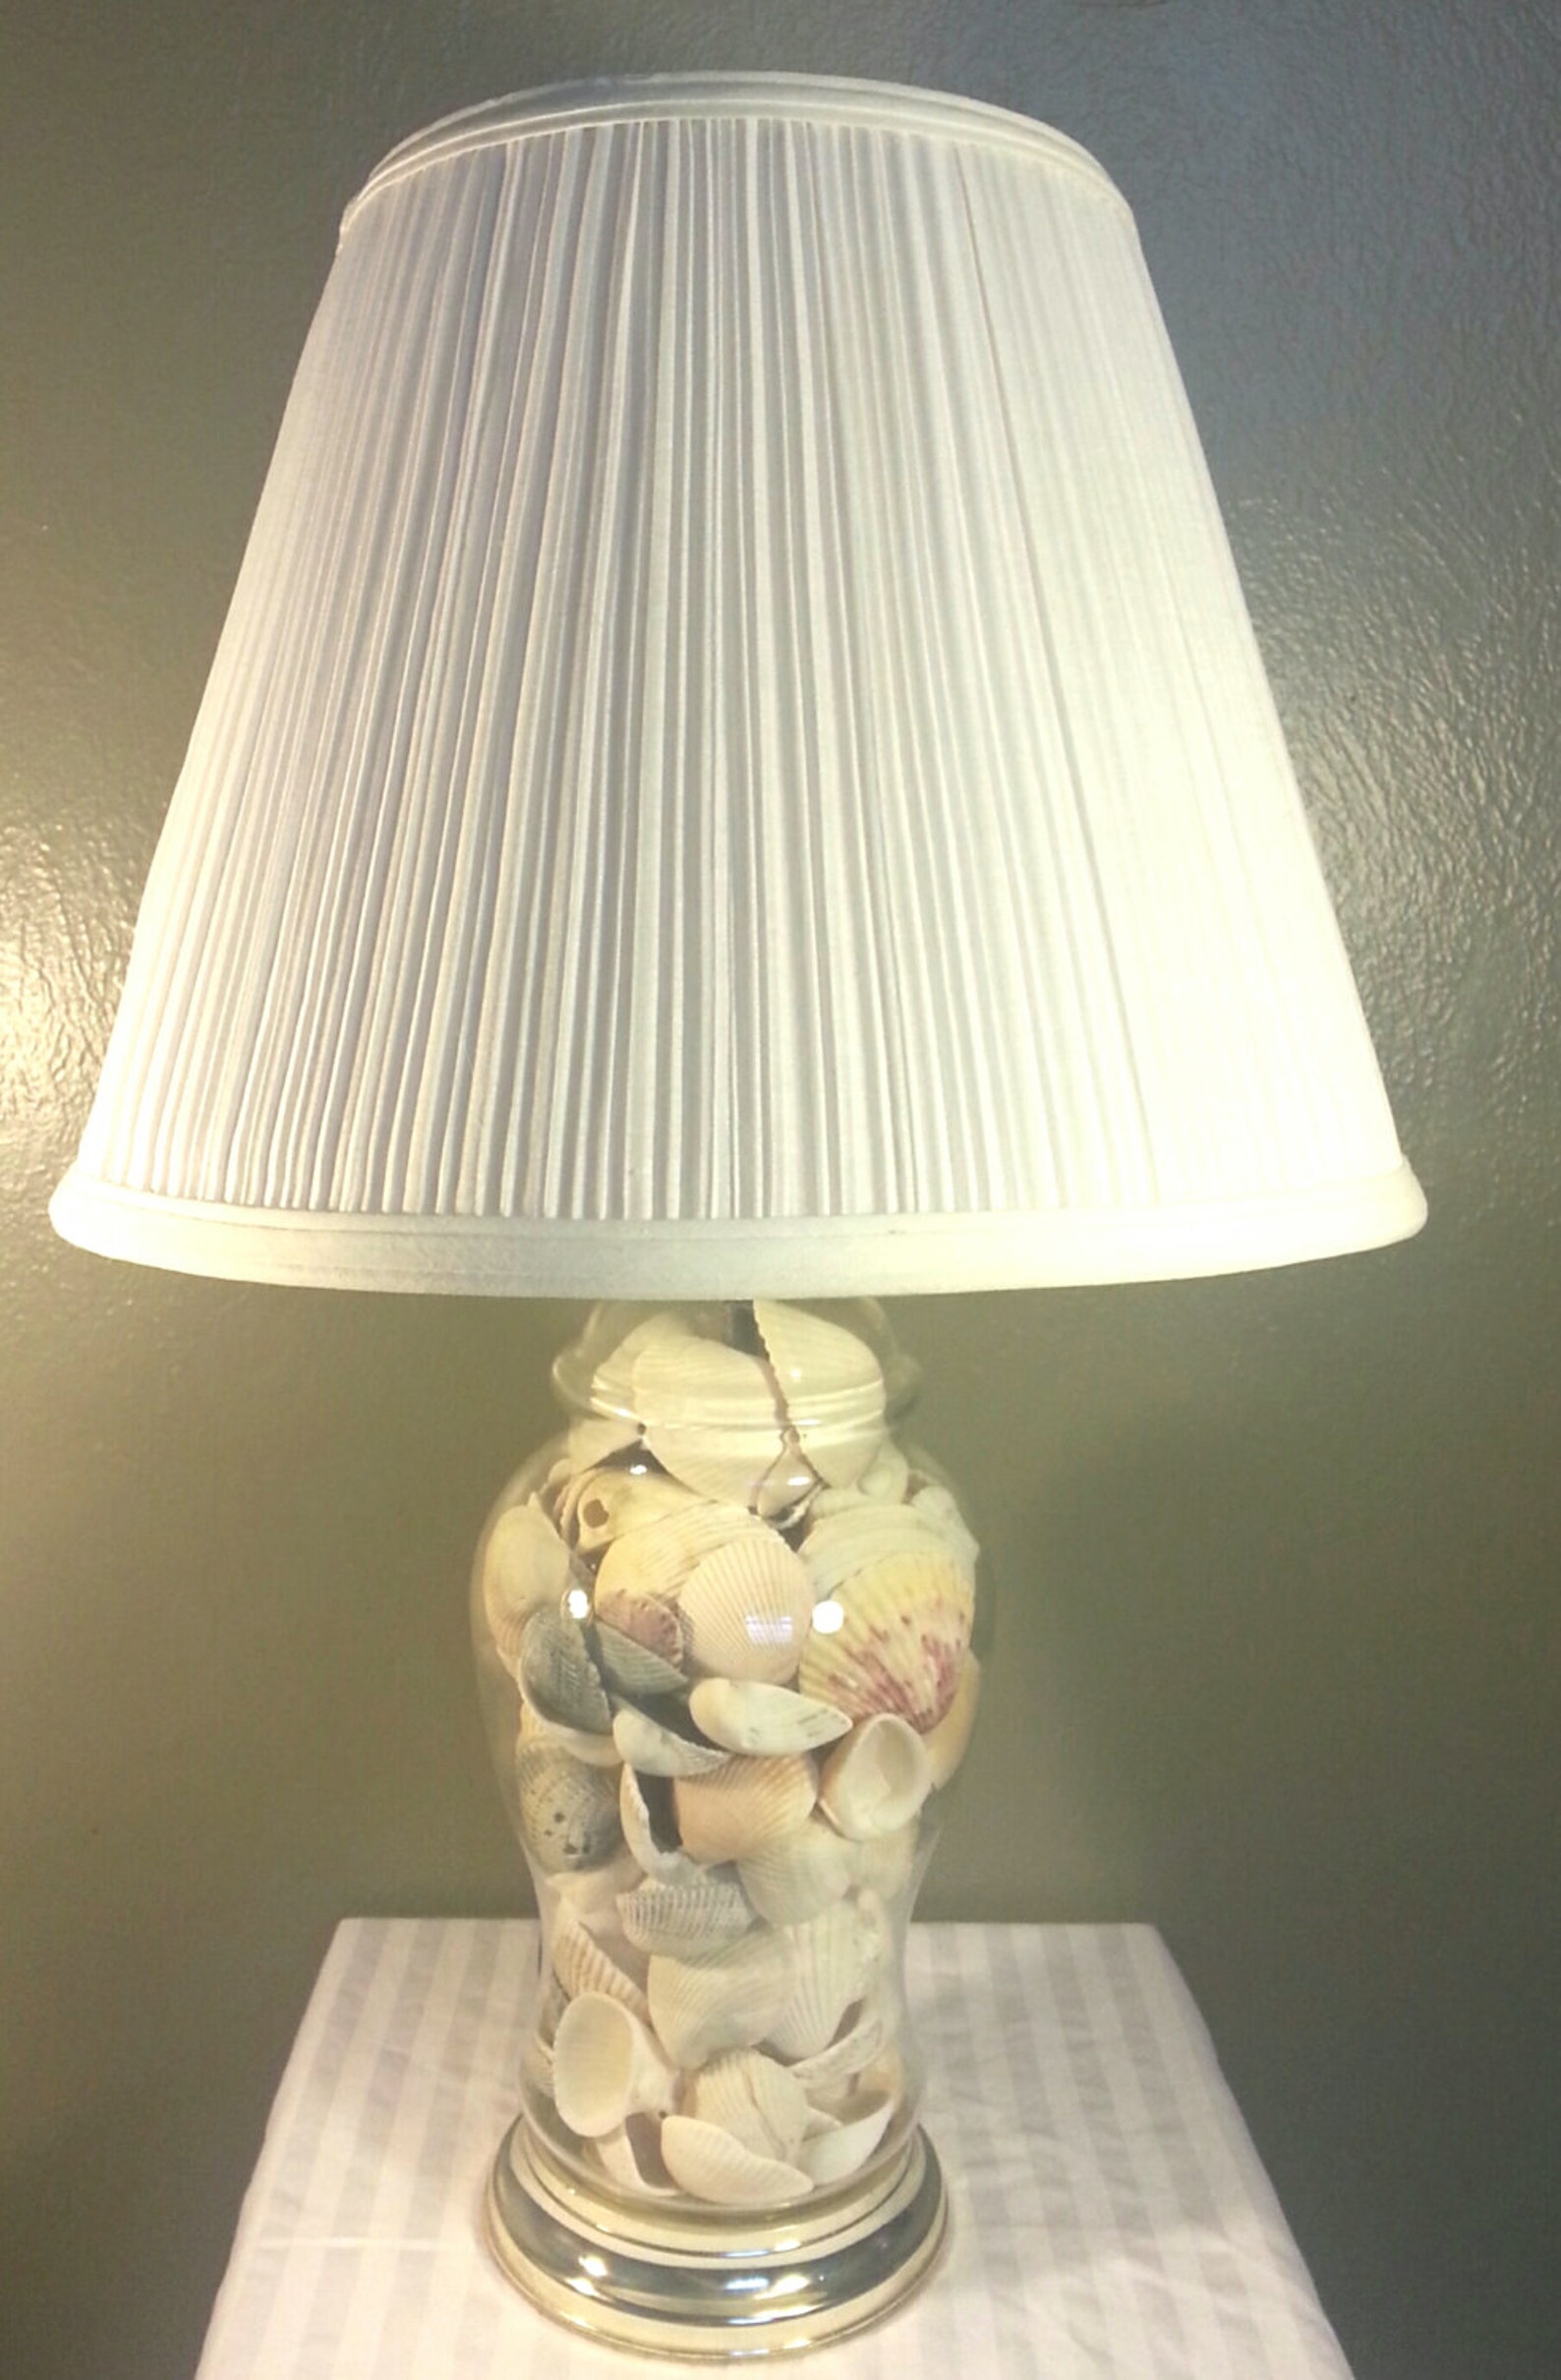 Glass Table Lamp filled with seashells Fillable Electric Lamp | Etsy